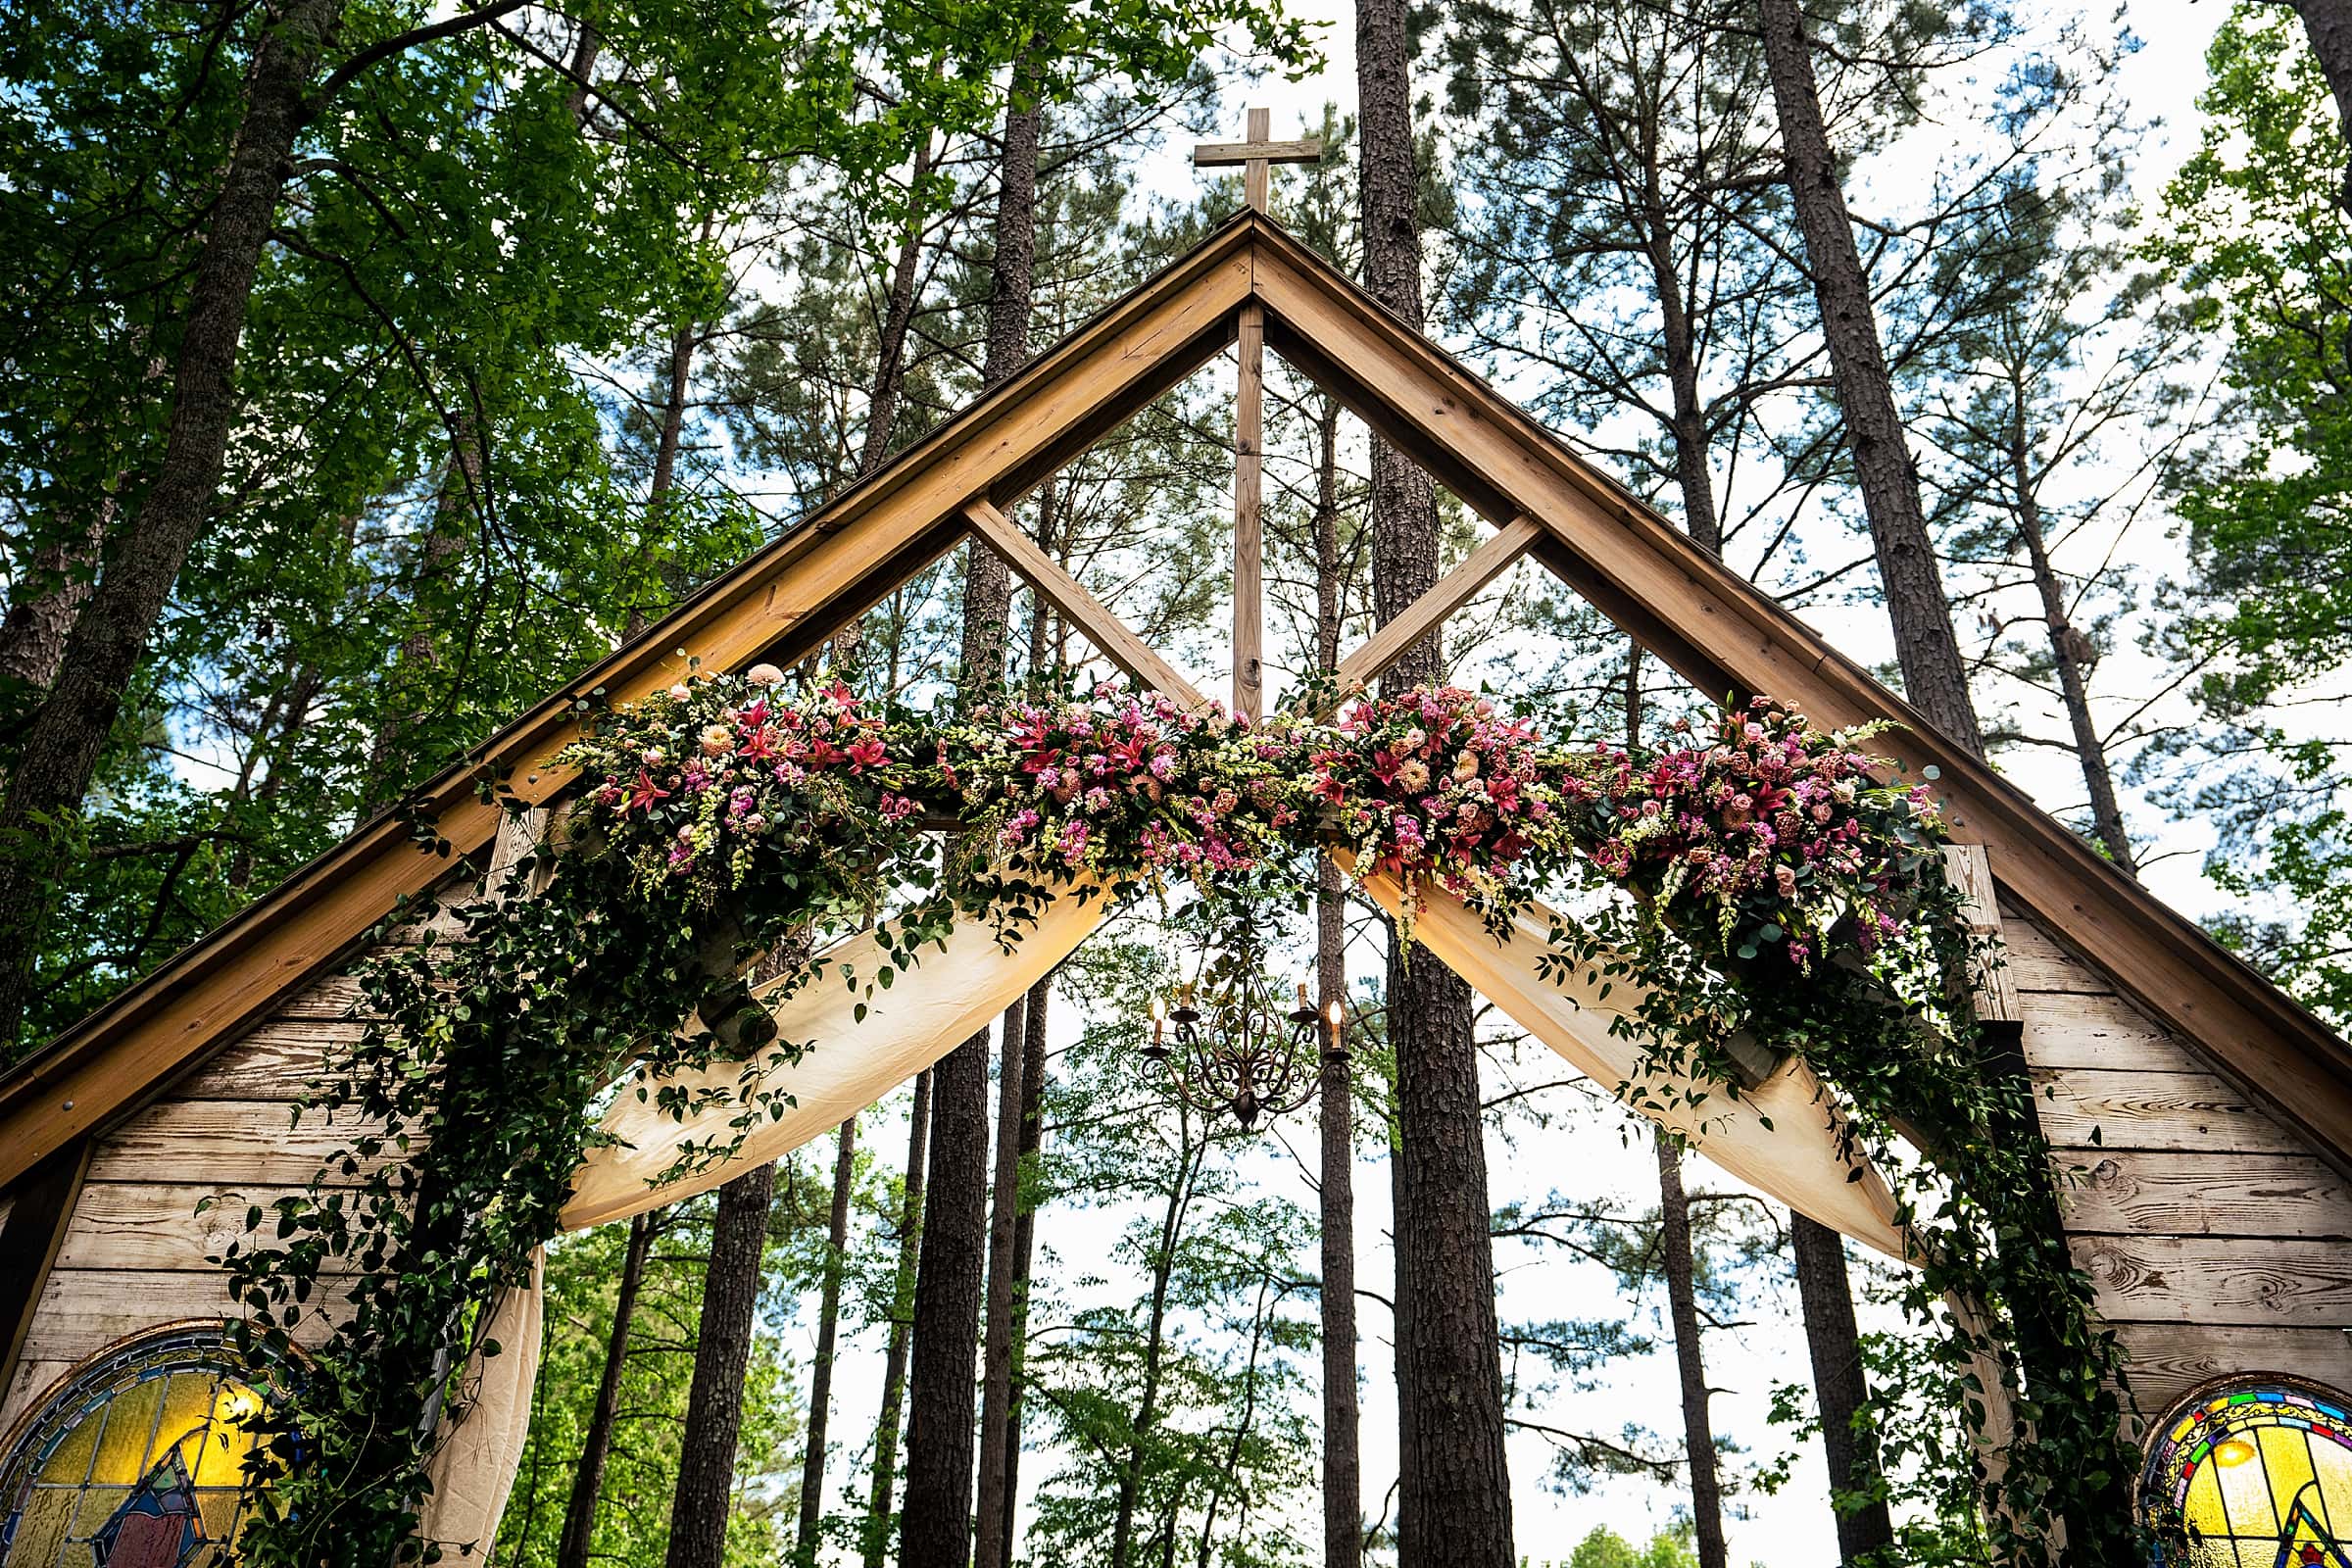 Florals at an outdoor chapel